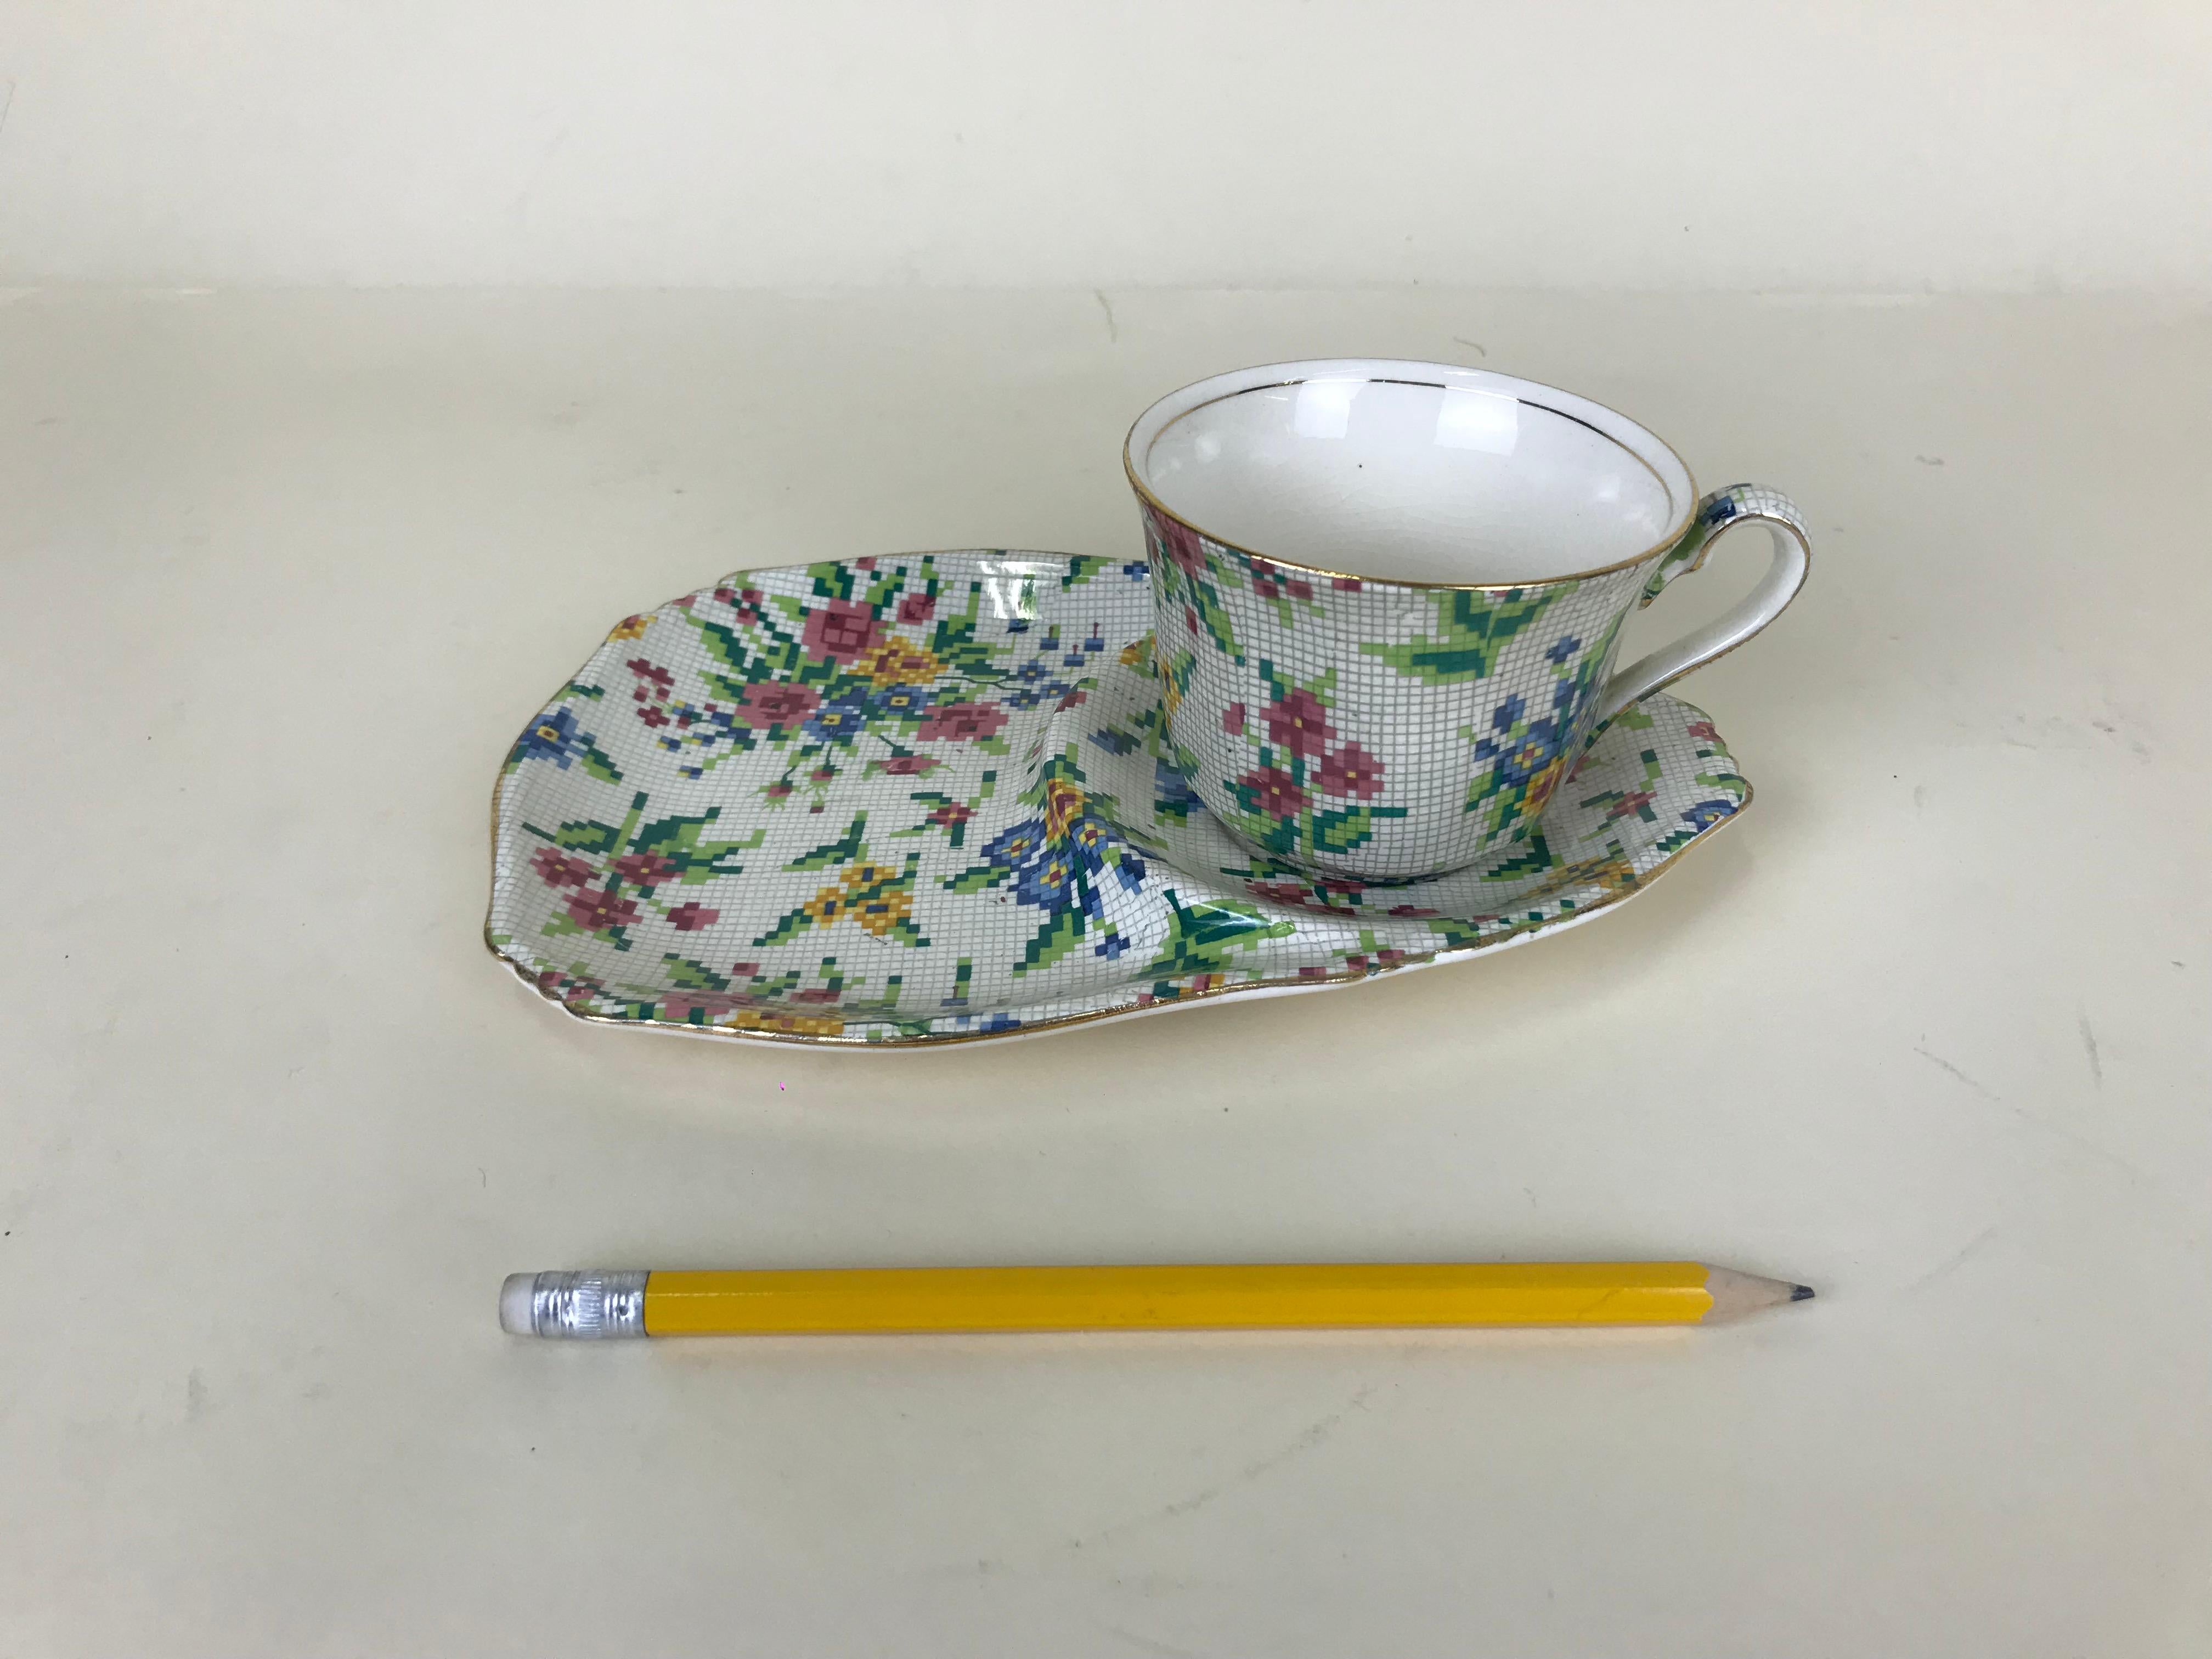 Royal Winton cup and saucer, not restored and ready to be used. The Queen Anne (1936) needlepoint pattern is part of the famed Chintz collection by Royal Winton. It consist of bouquets of flowers in pink, blue and yellow, accompanied by green leaves